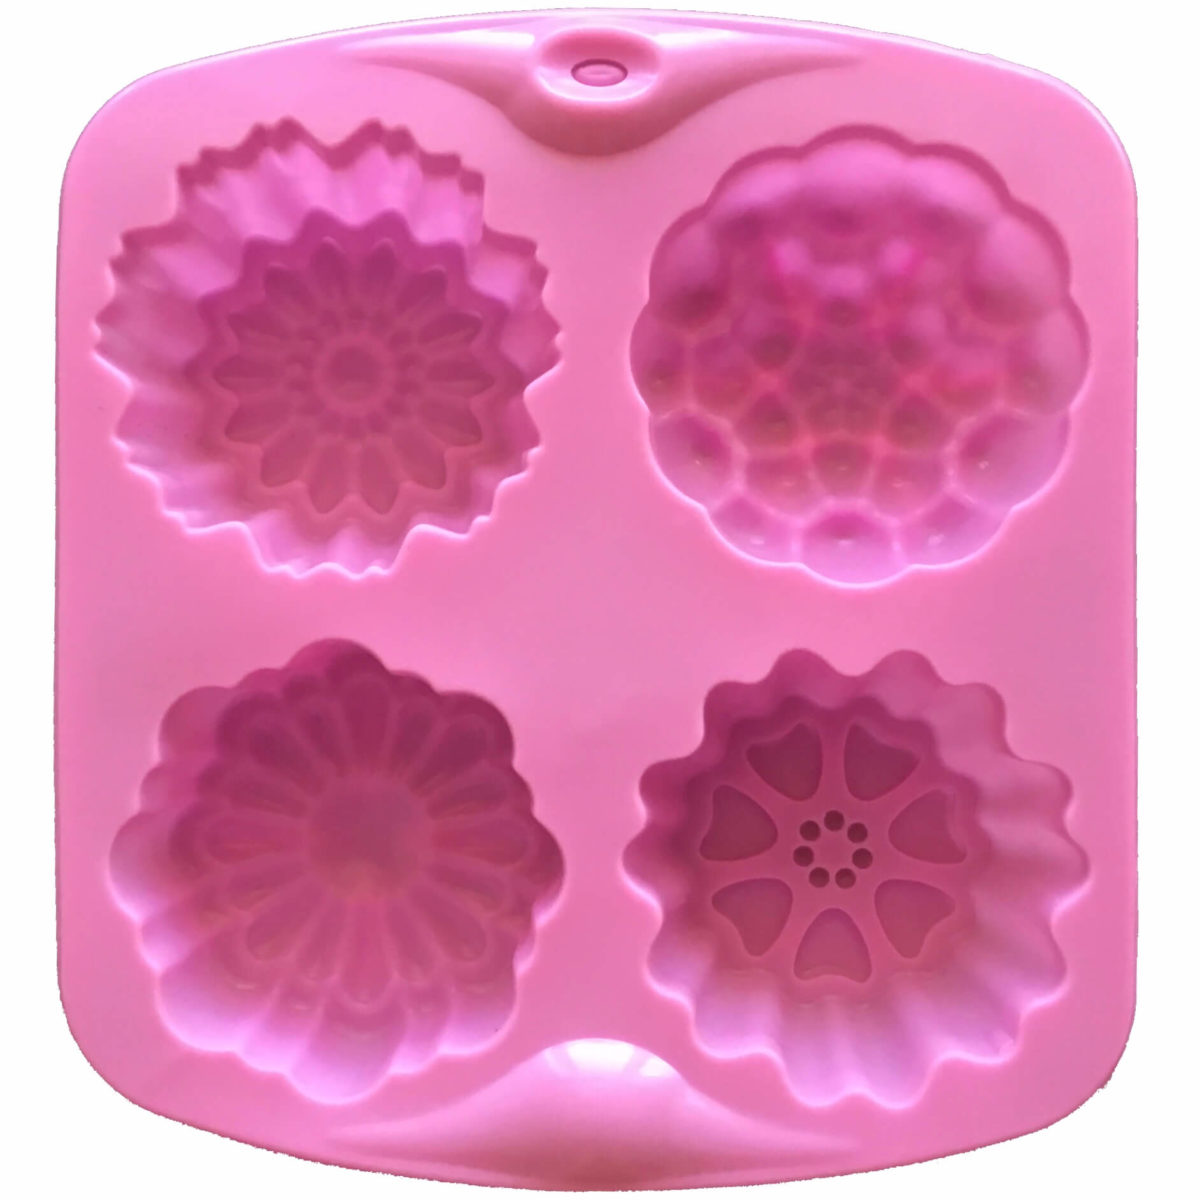 back of pink four cavity silicone mould with four individual floral designs showing individual mould cavity details